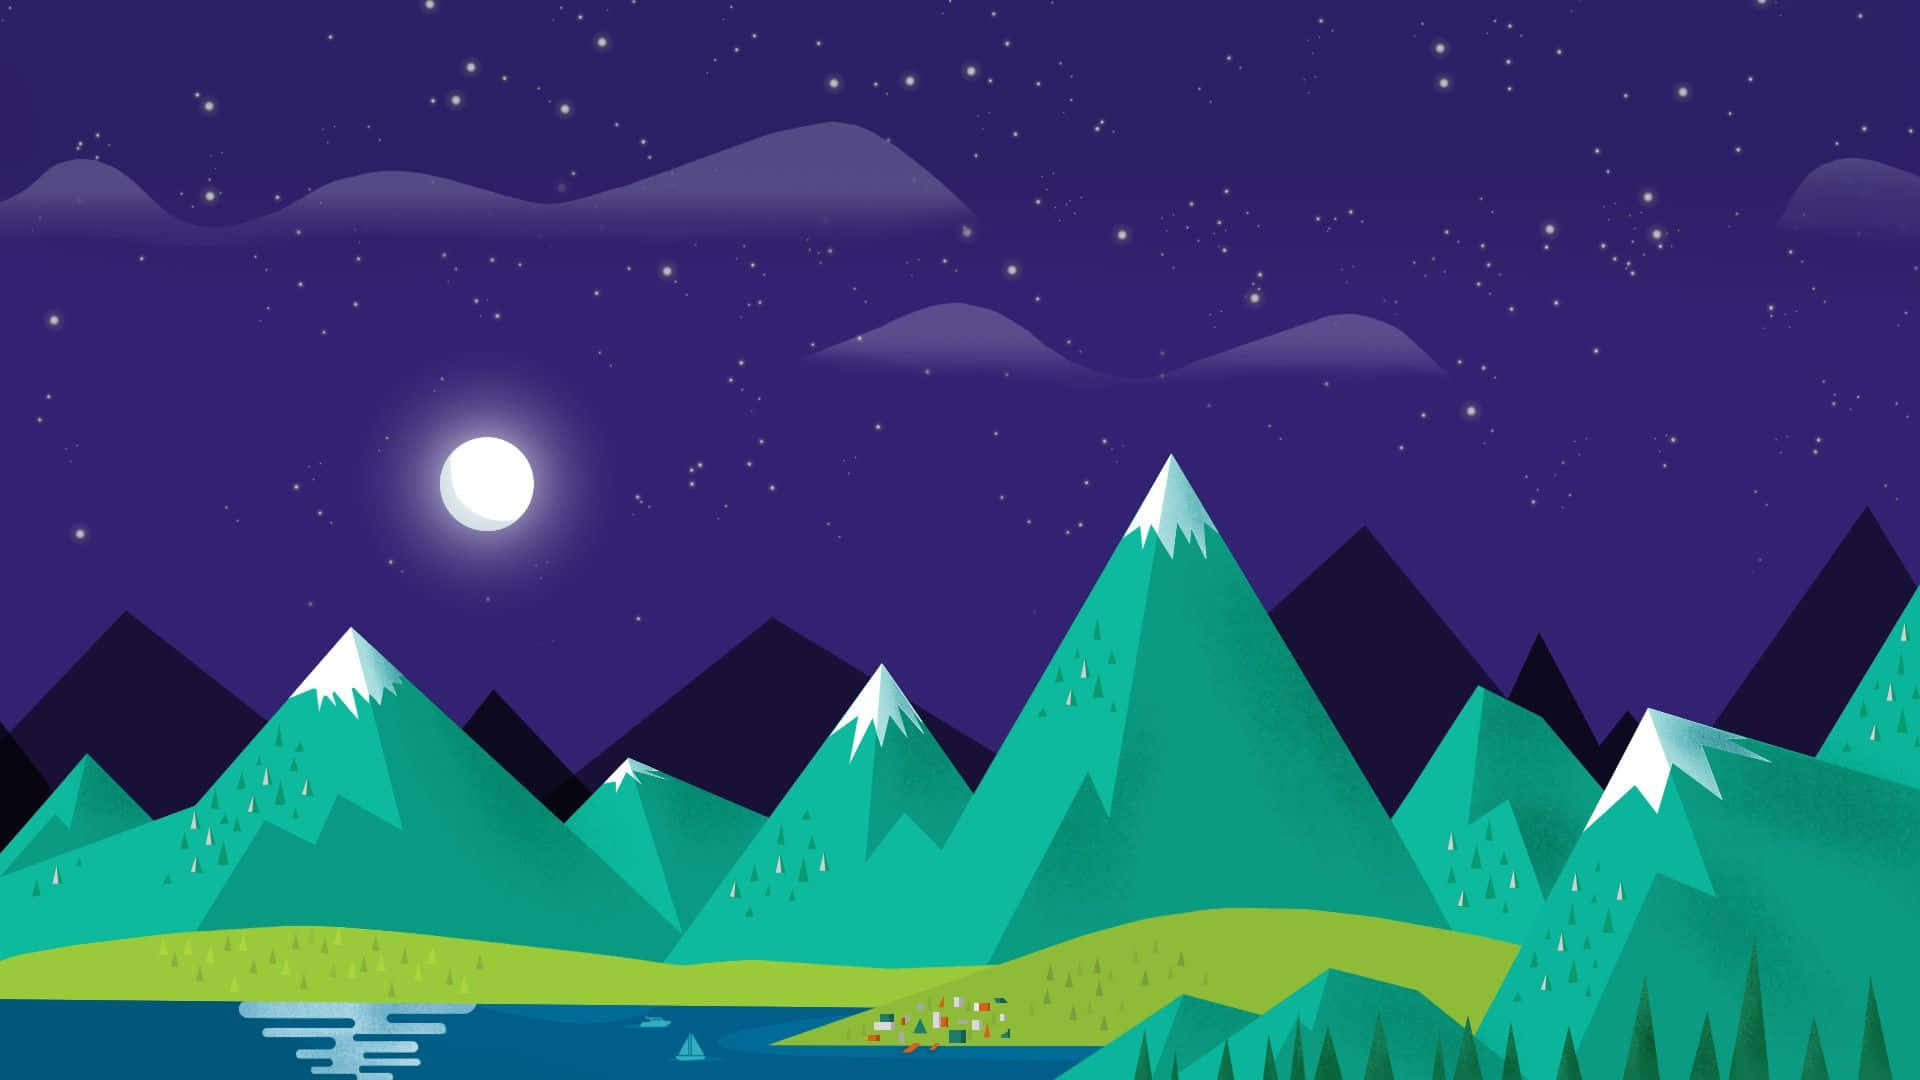 A Night Scene With Mountains And A Lake